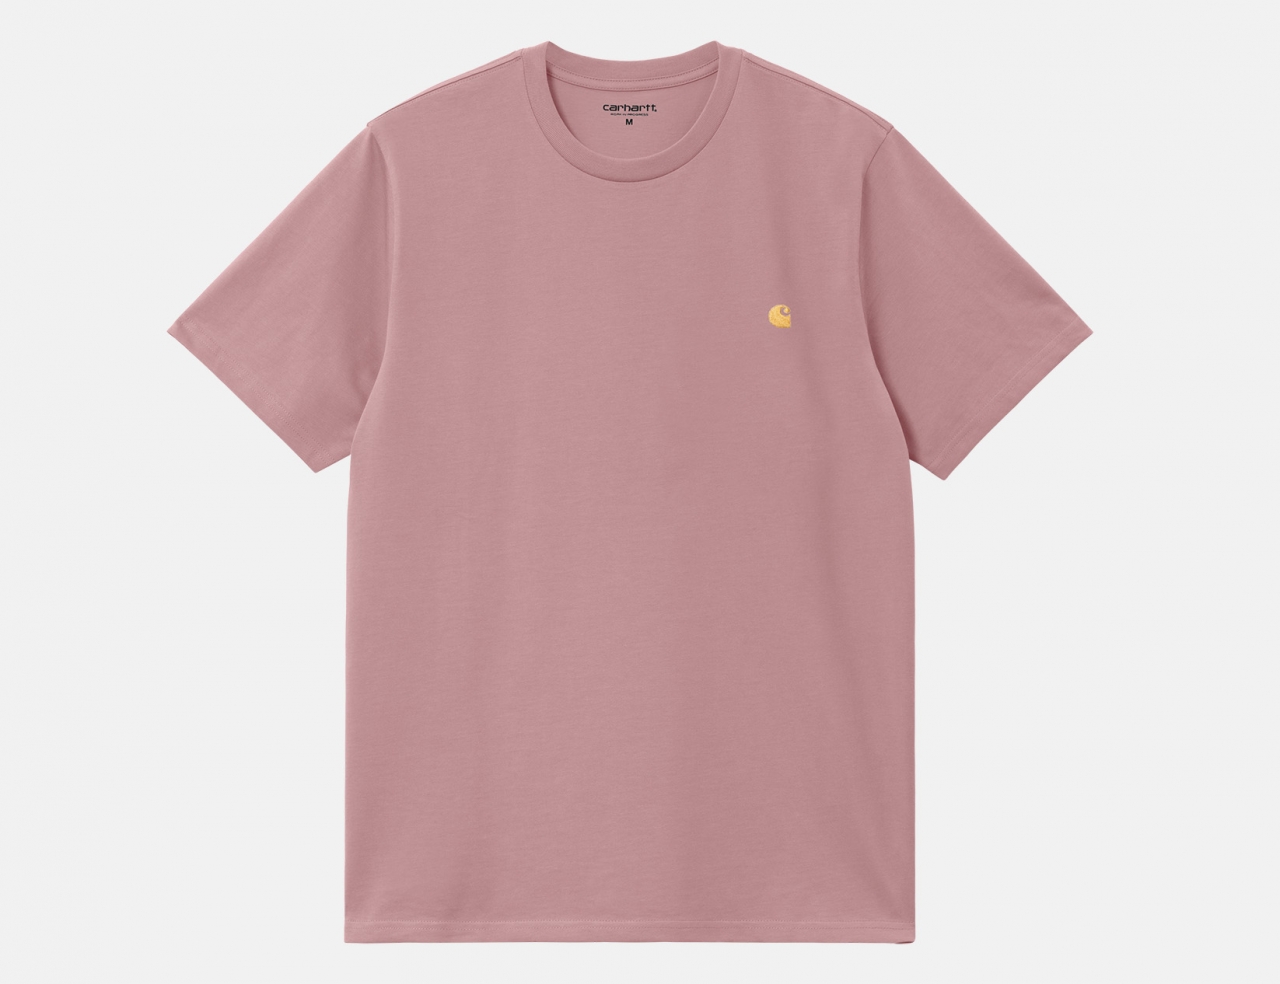 Carhartt WIP S/S Chase T-Shirt - Glassy Pink/Gold